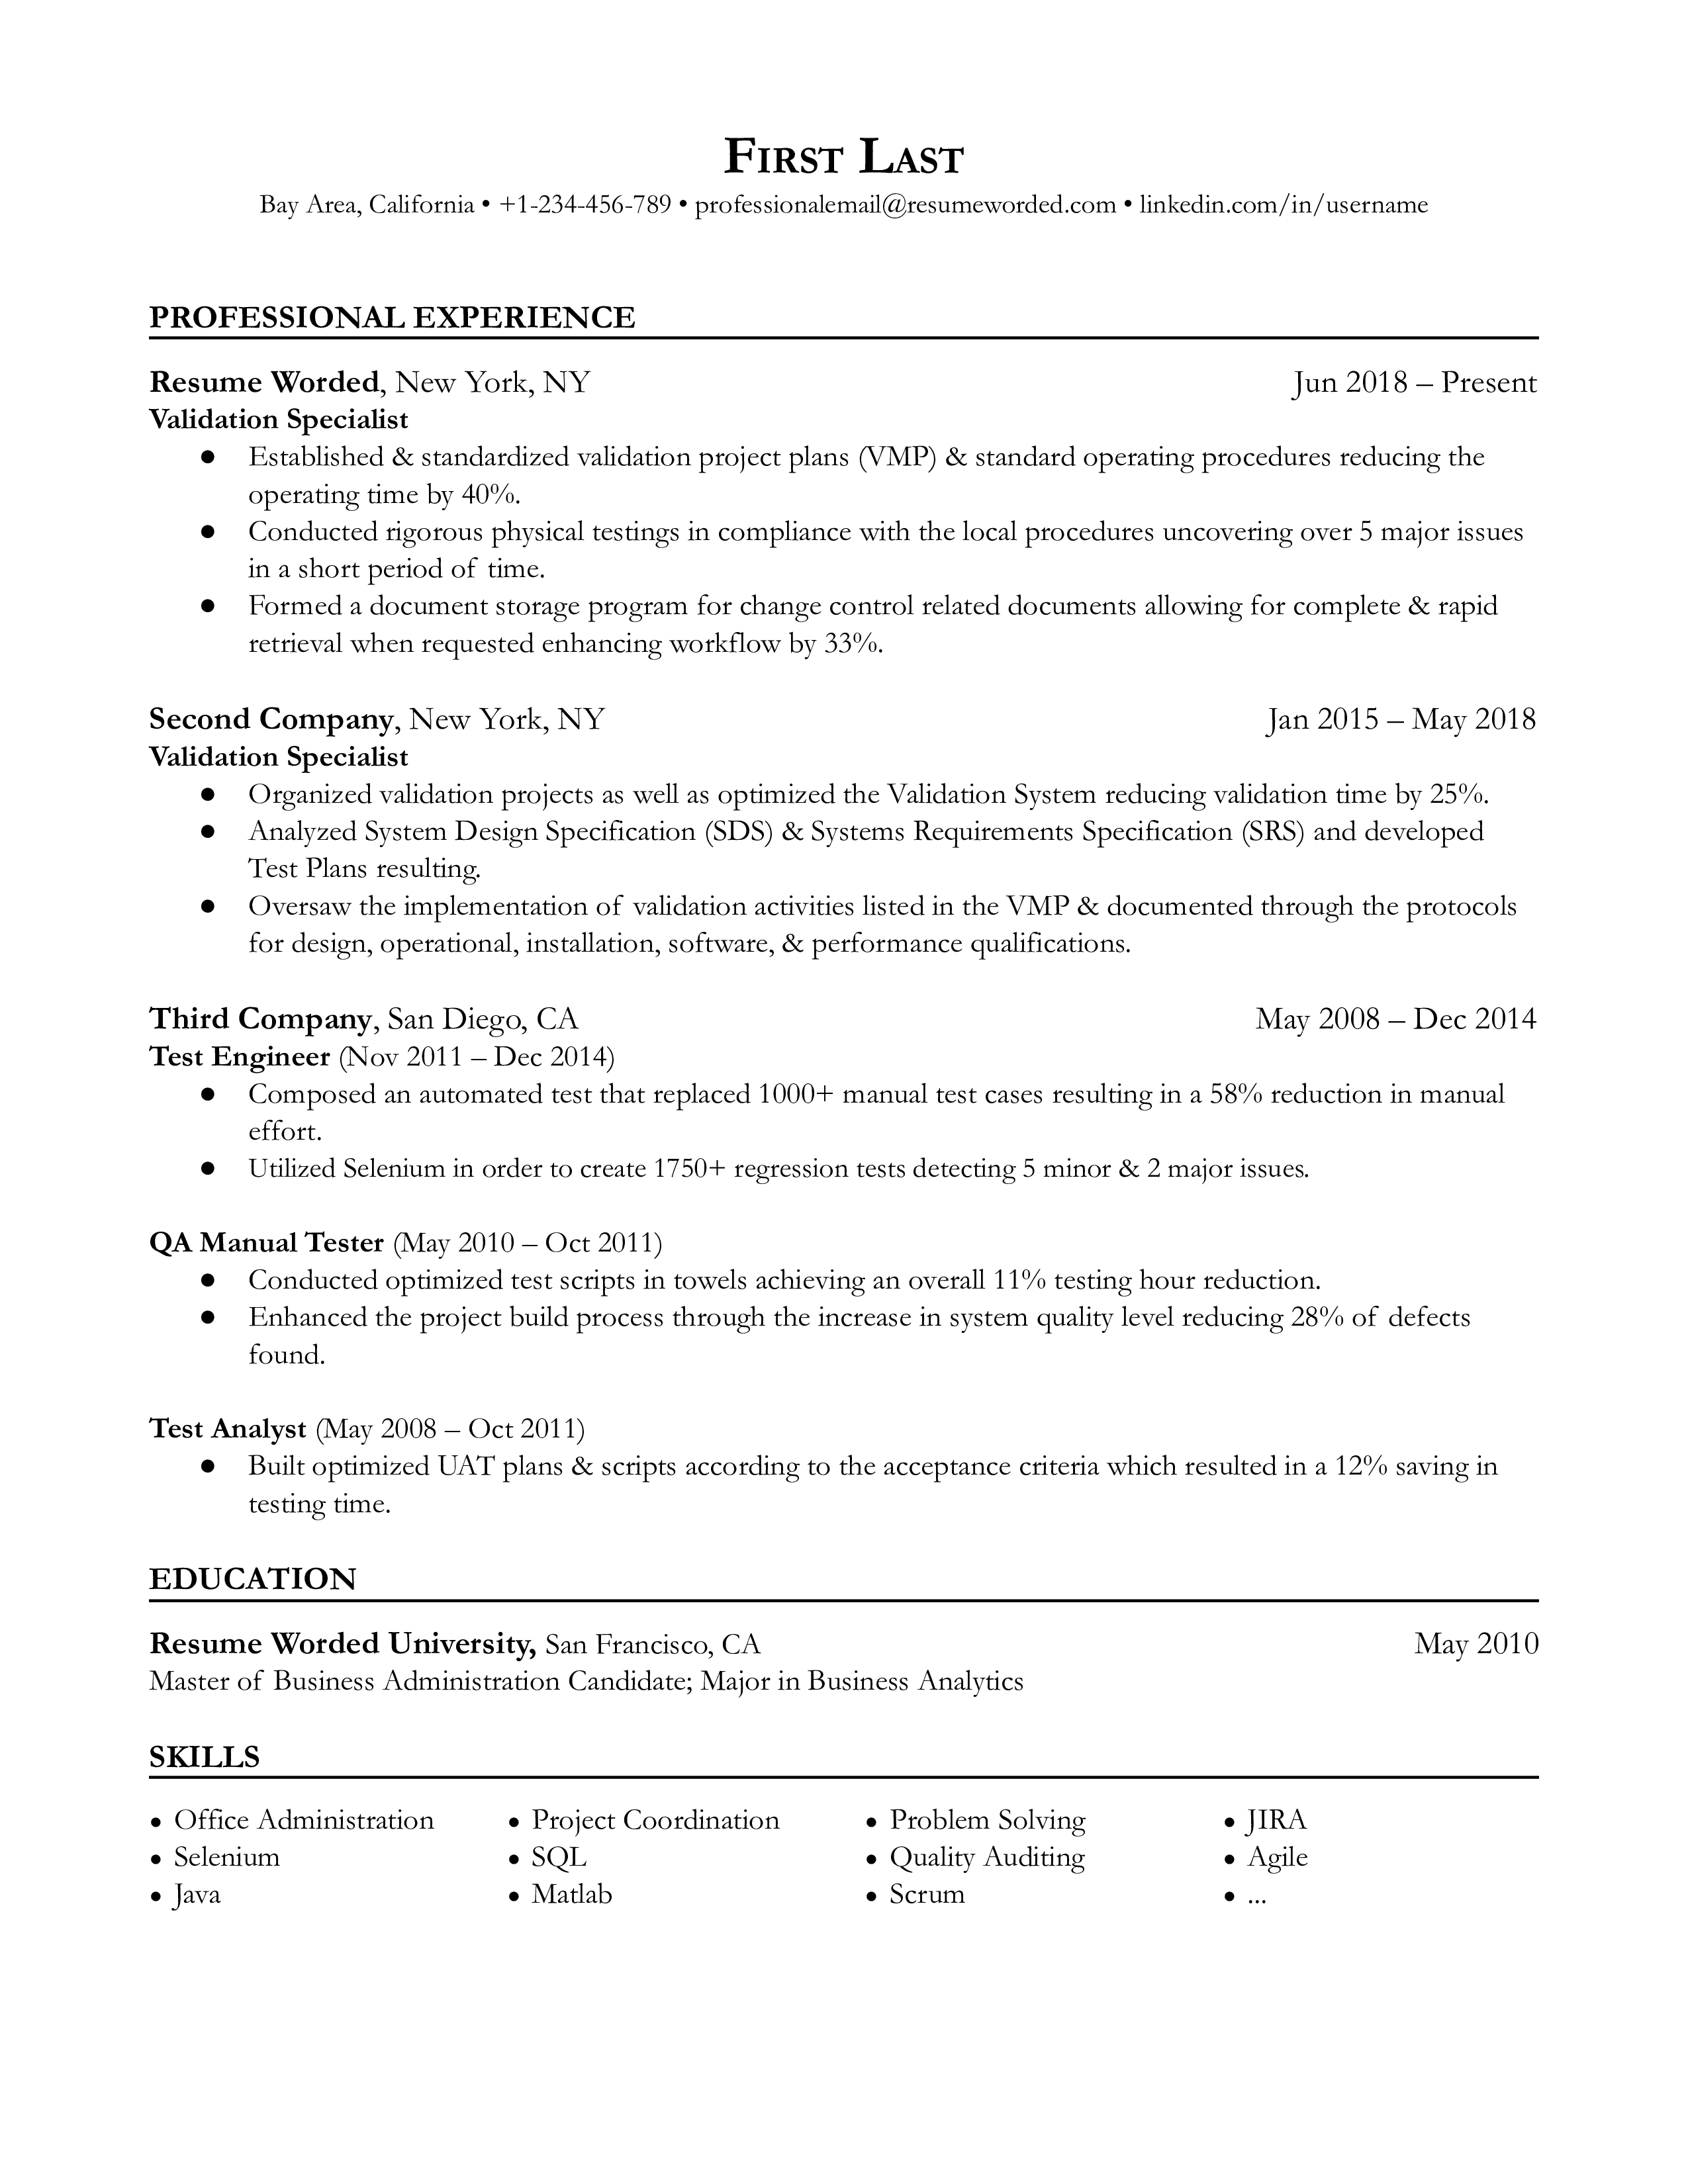 A resume for a validation specialist with a degree in business analytics and experience as a test analyst and test engineer.